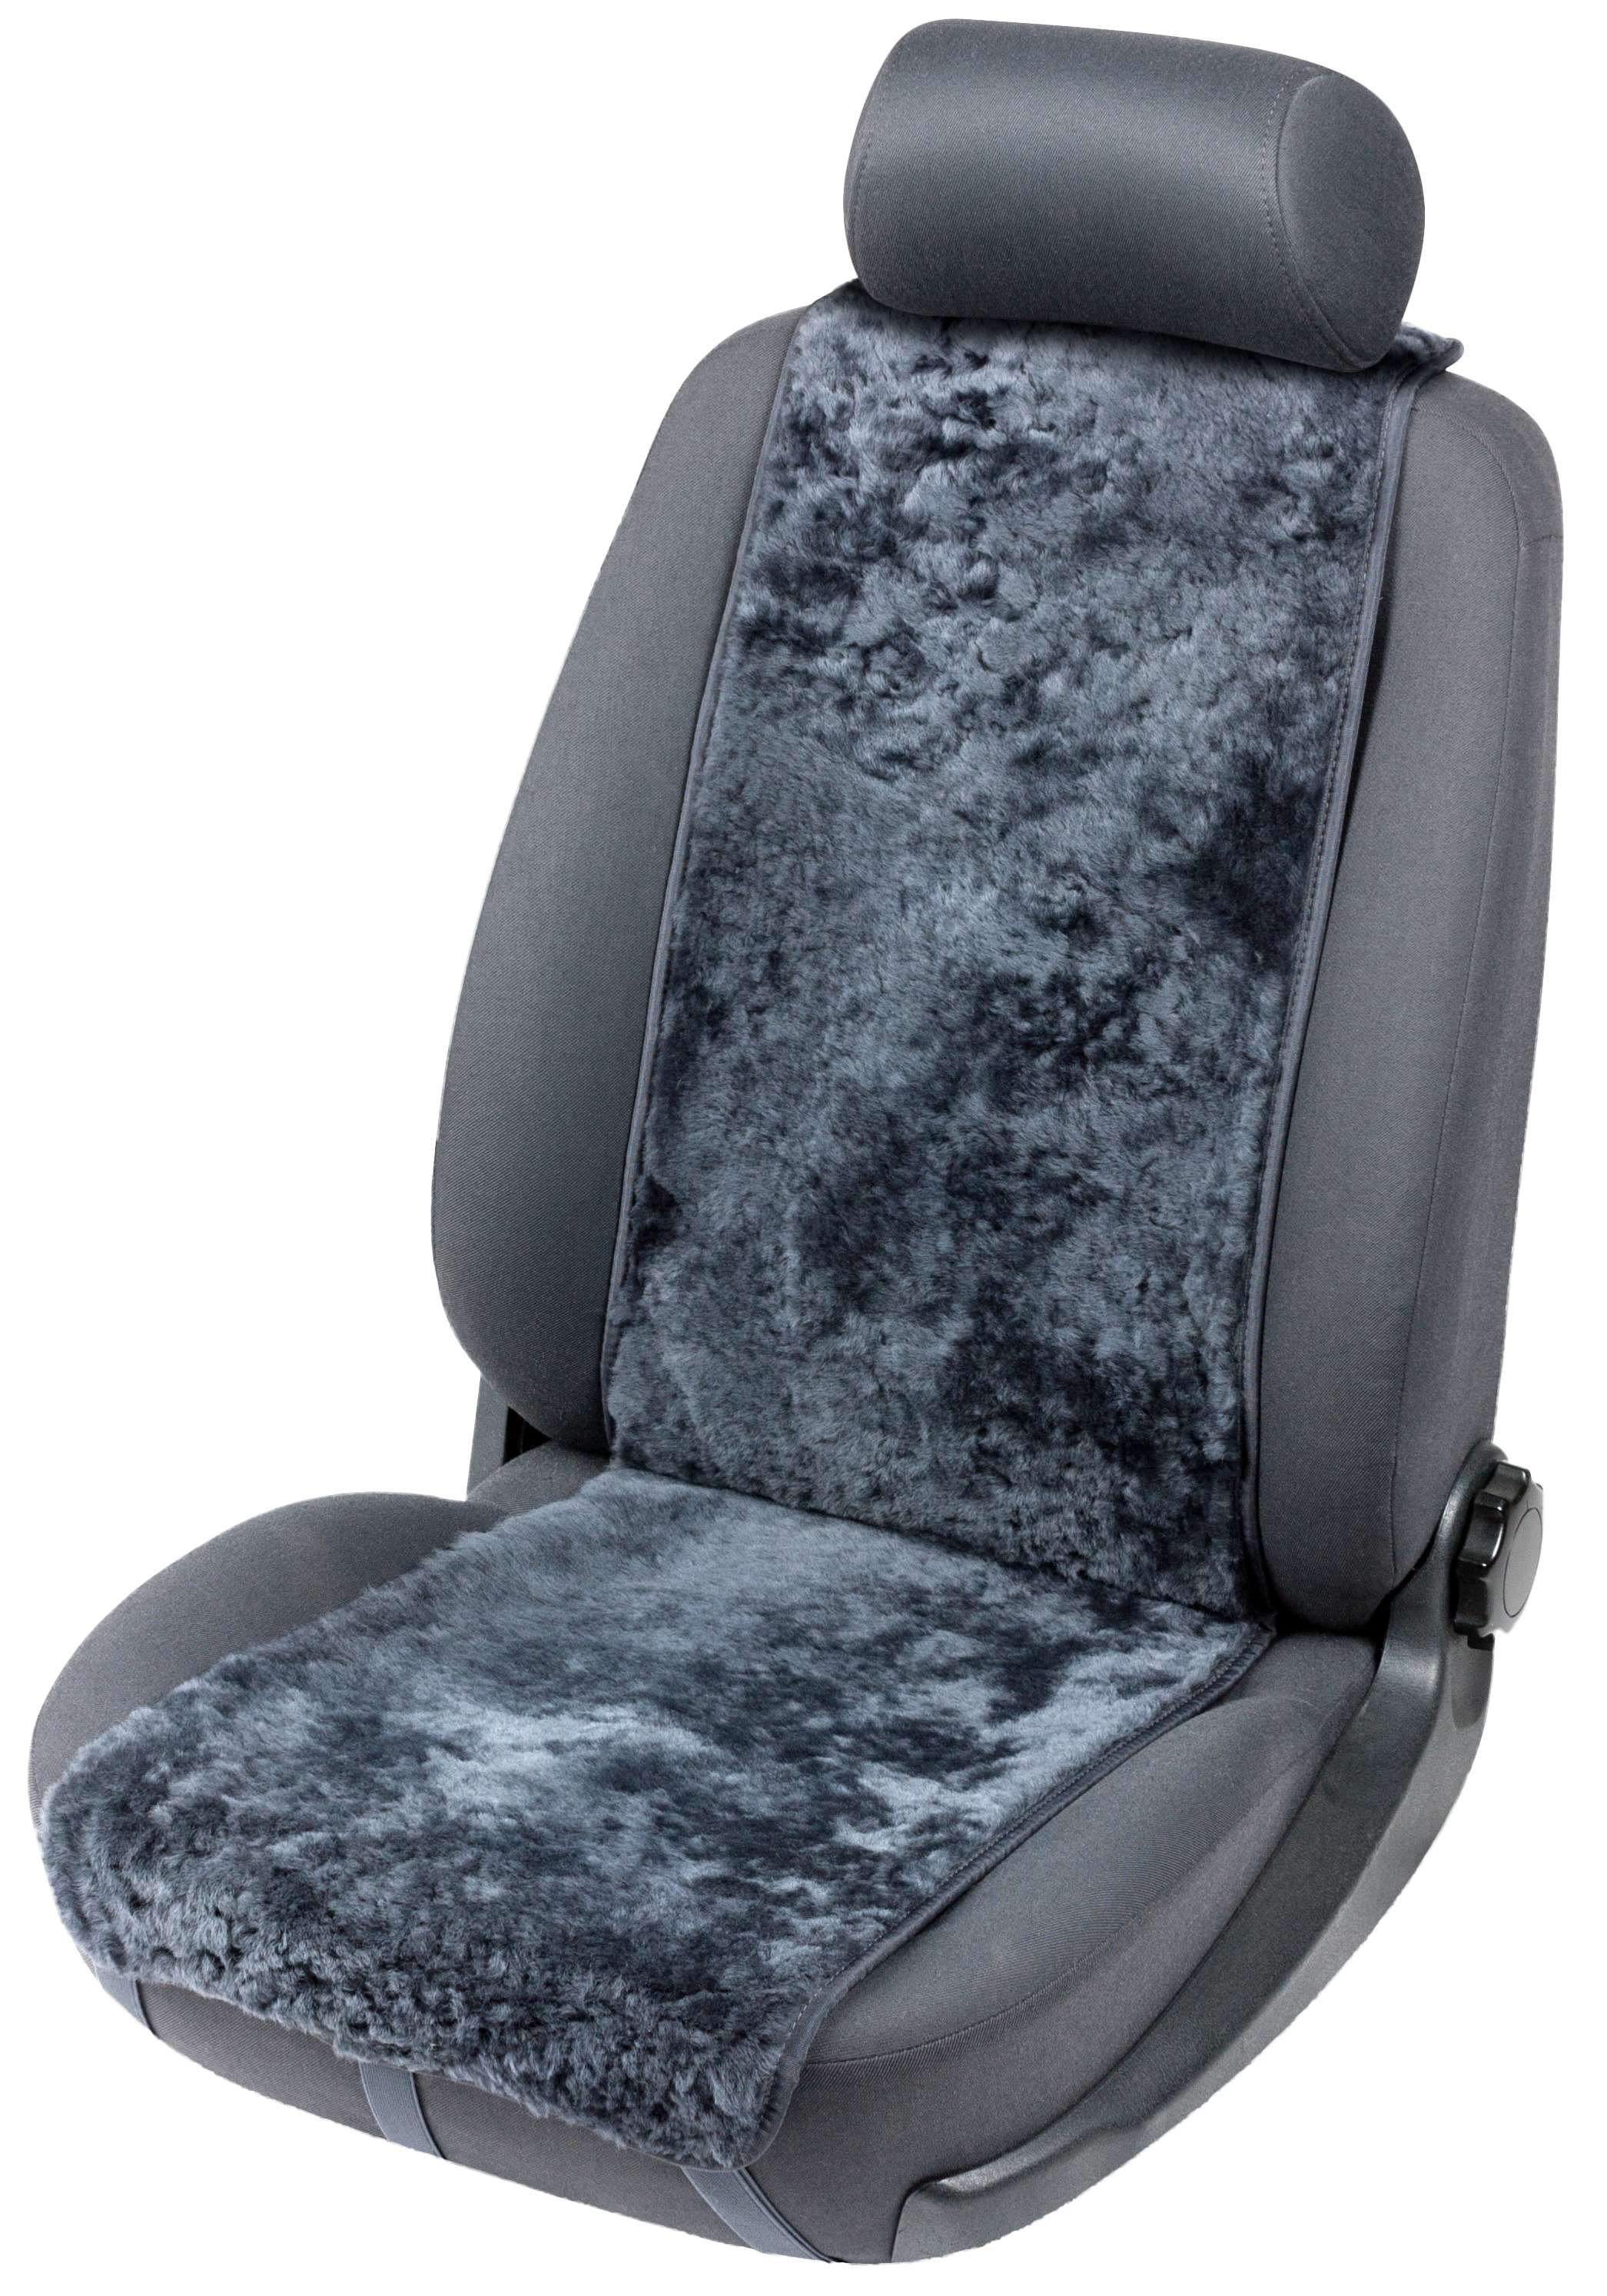 Car Seat cover made of lambskin Cosmo anthracite 12-14mm fur height